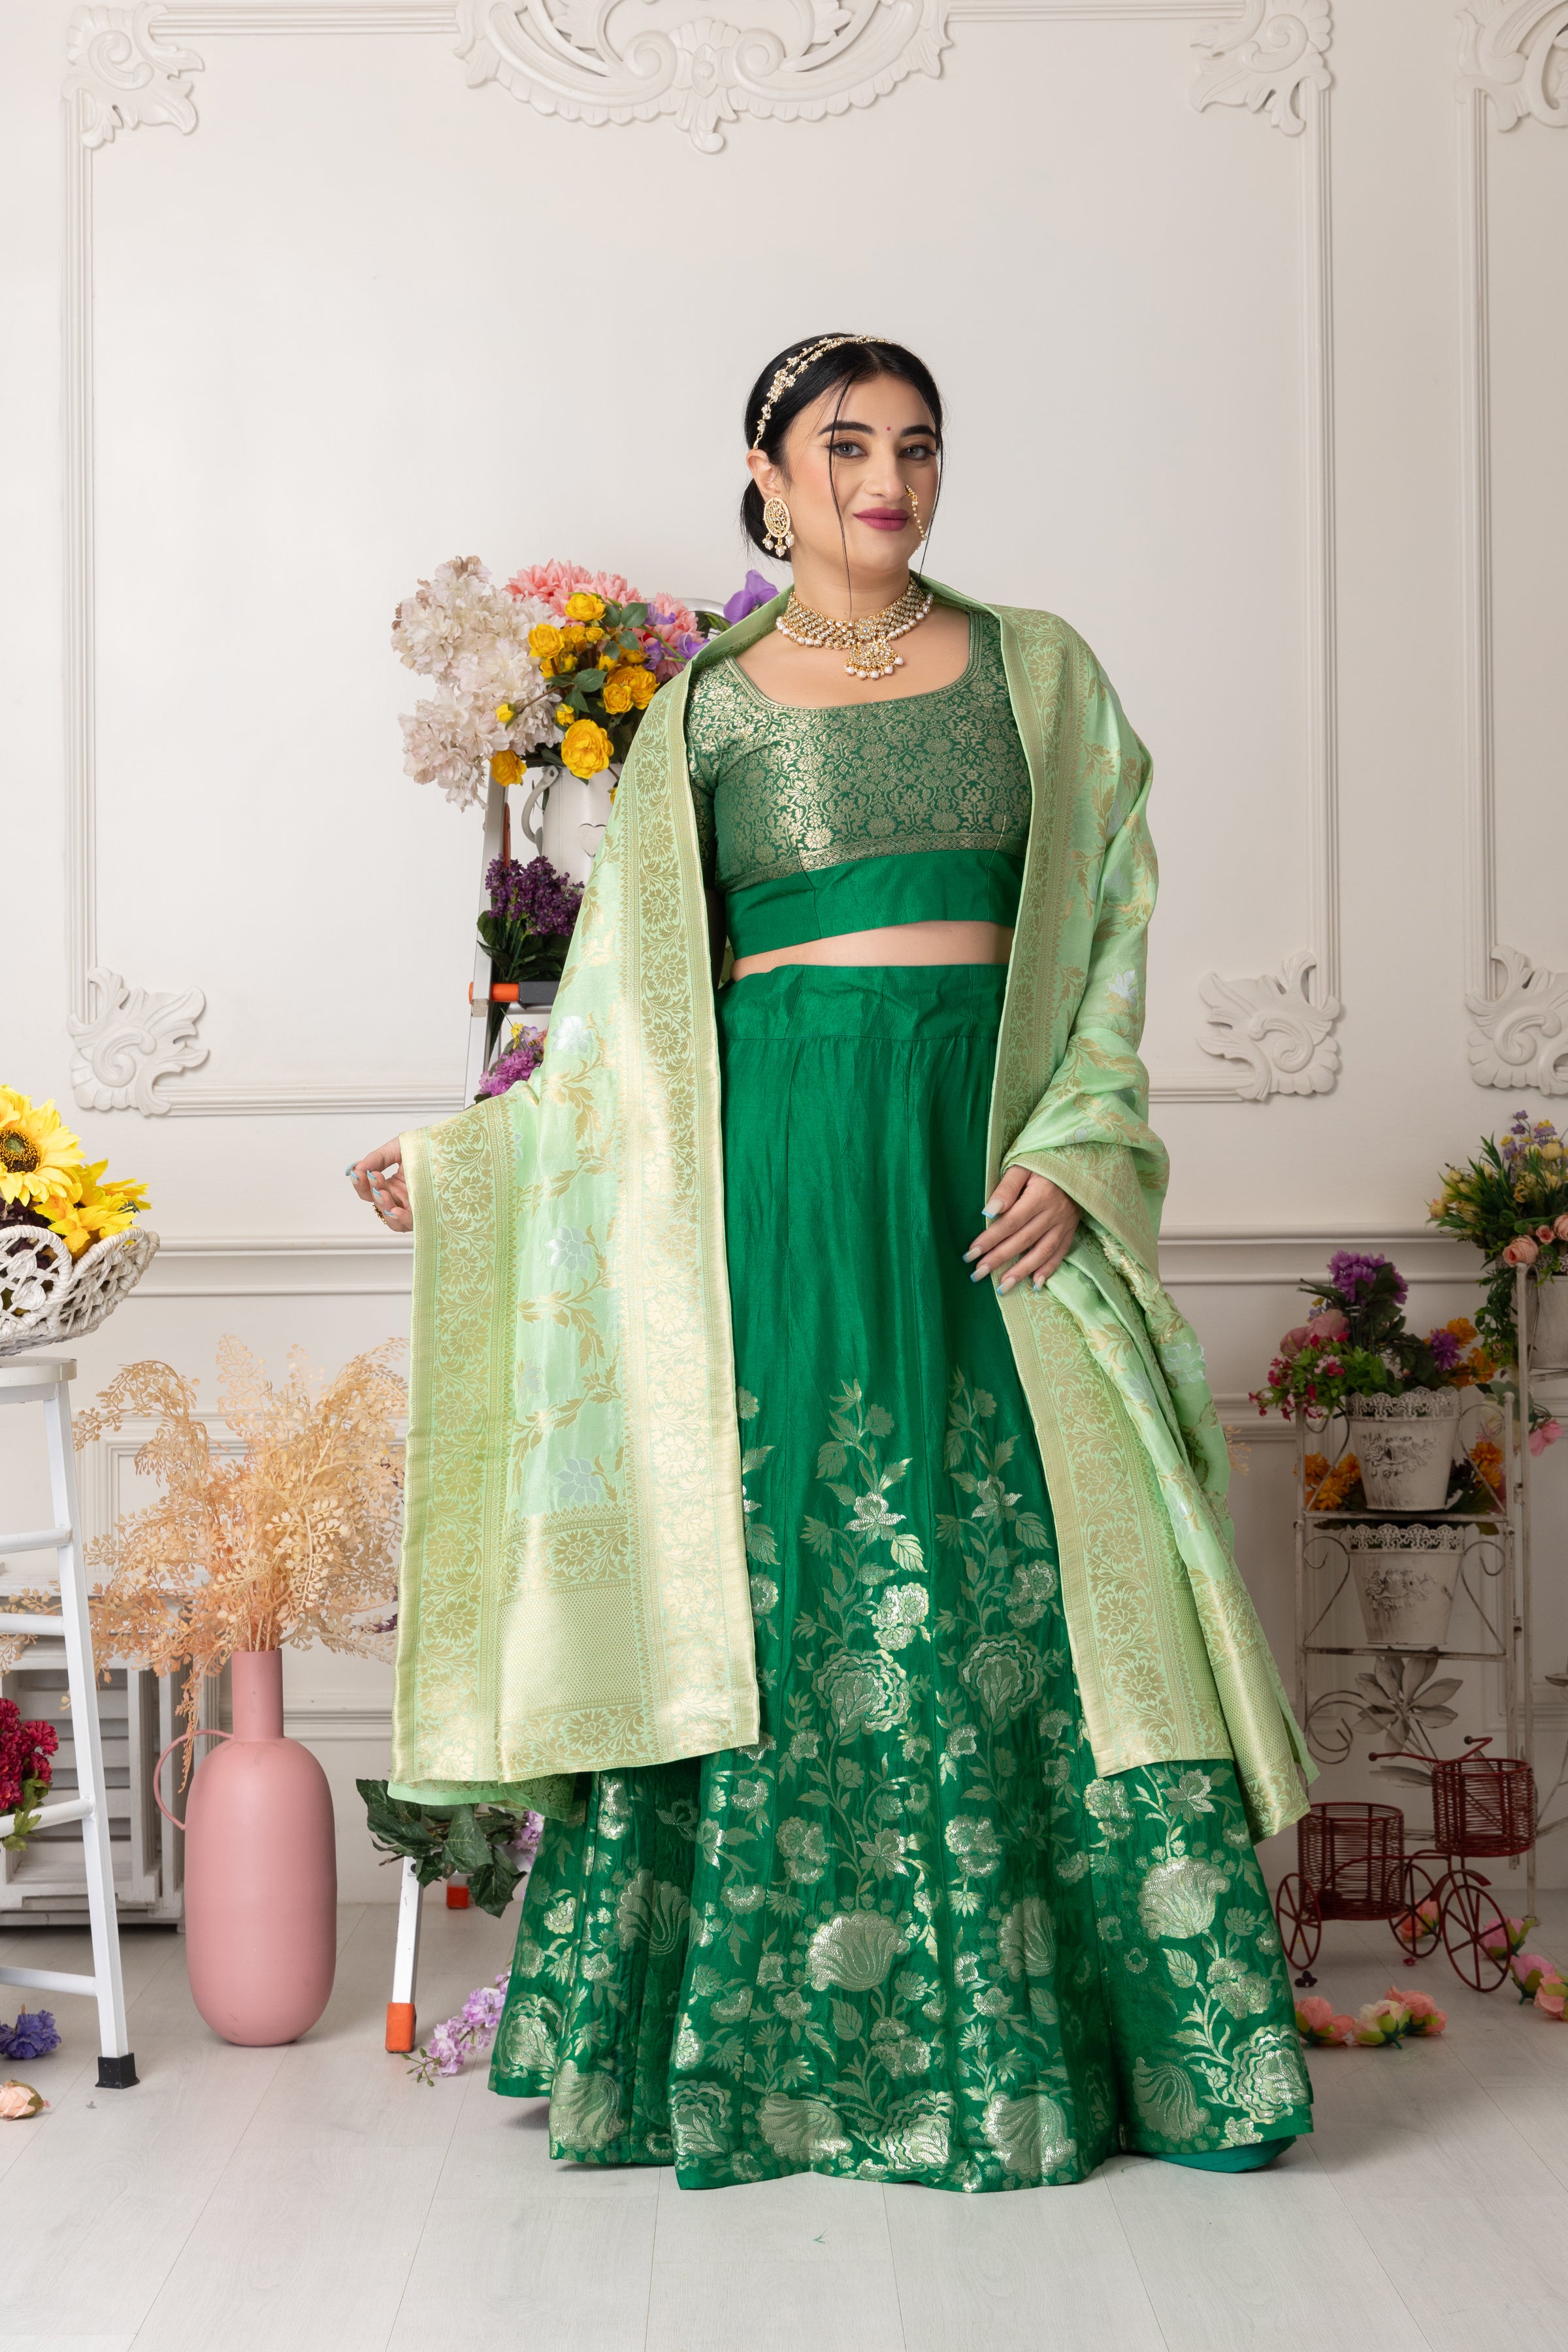 Green Satin Silk Lehenga Choli With Embroidery Sequence Work and Soft Net  Dupatta for Women , Ethnic Lehenga Choli , Wedding Lehenga Choli - Etsy  Singapore